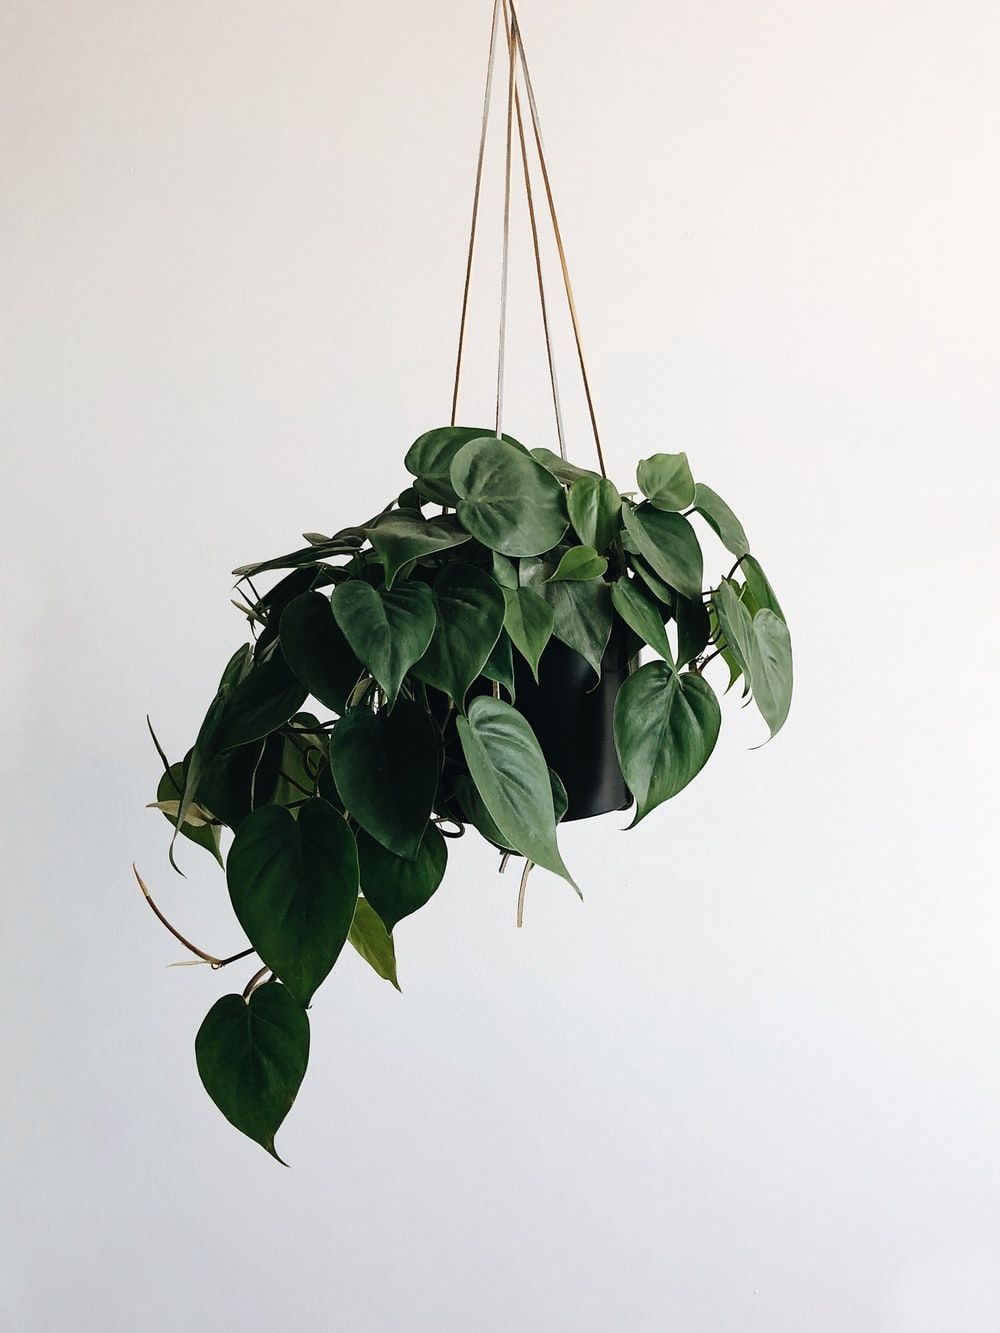 Hanging Plant Picture. Download Free Image